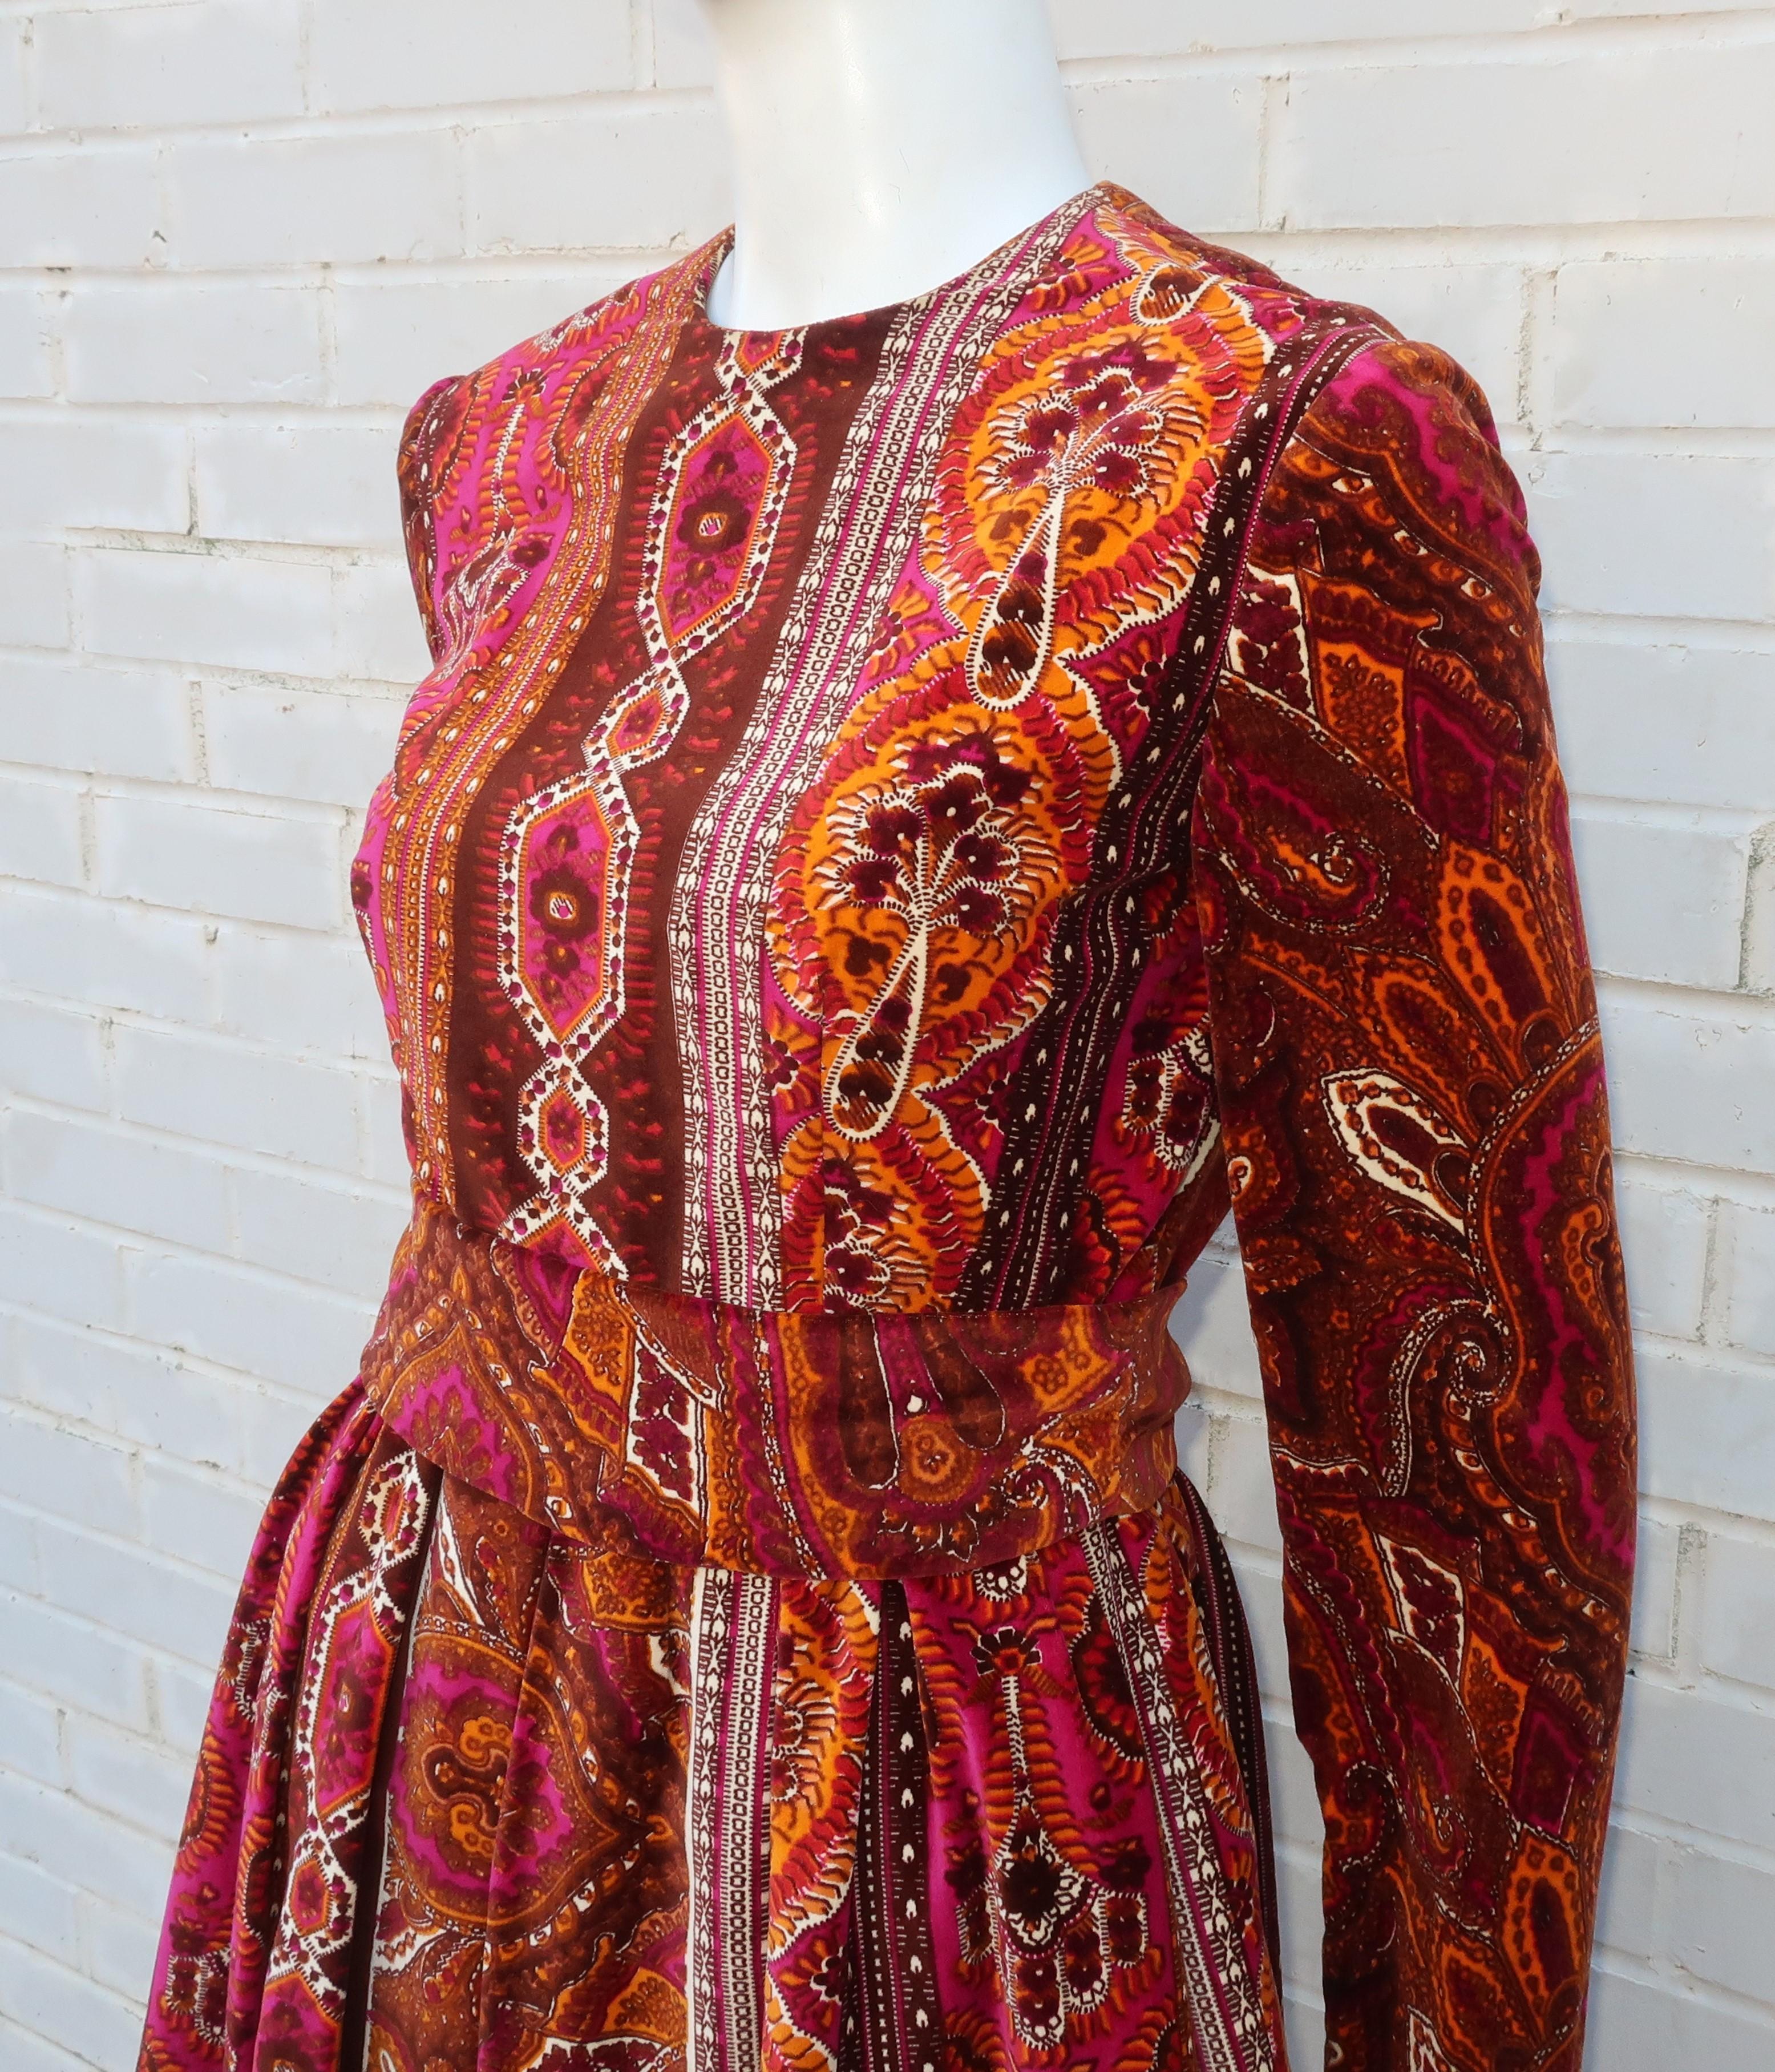 Enter the rich world of an exotic and colorful paisley style print with this 1970's Rodrigues pleated dress.  The lush feel of the velveteen fabric combined with the vibrant color combination of browns, orange, fuchsia pink and winter white lends